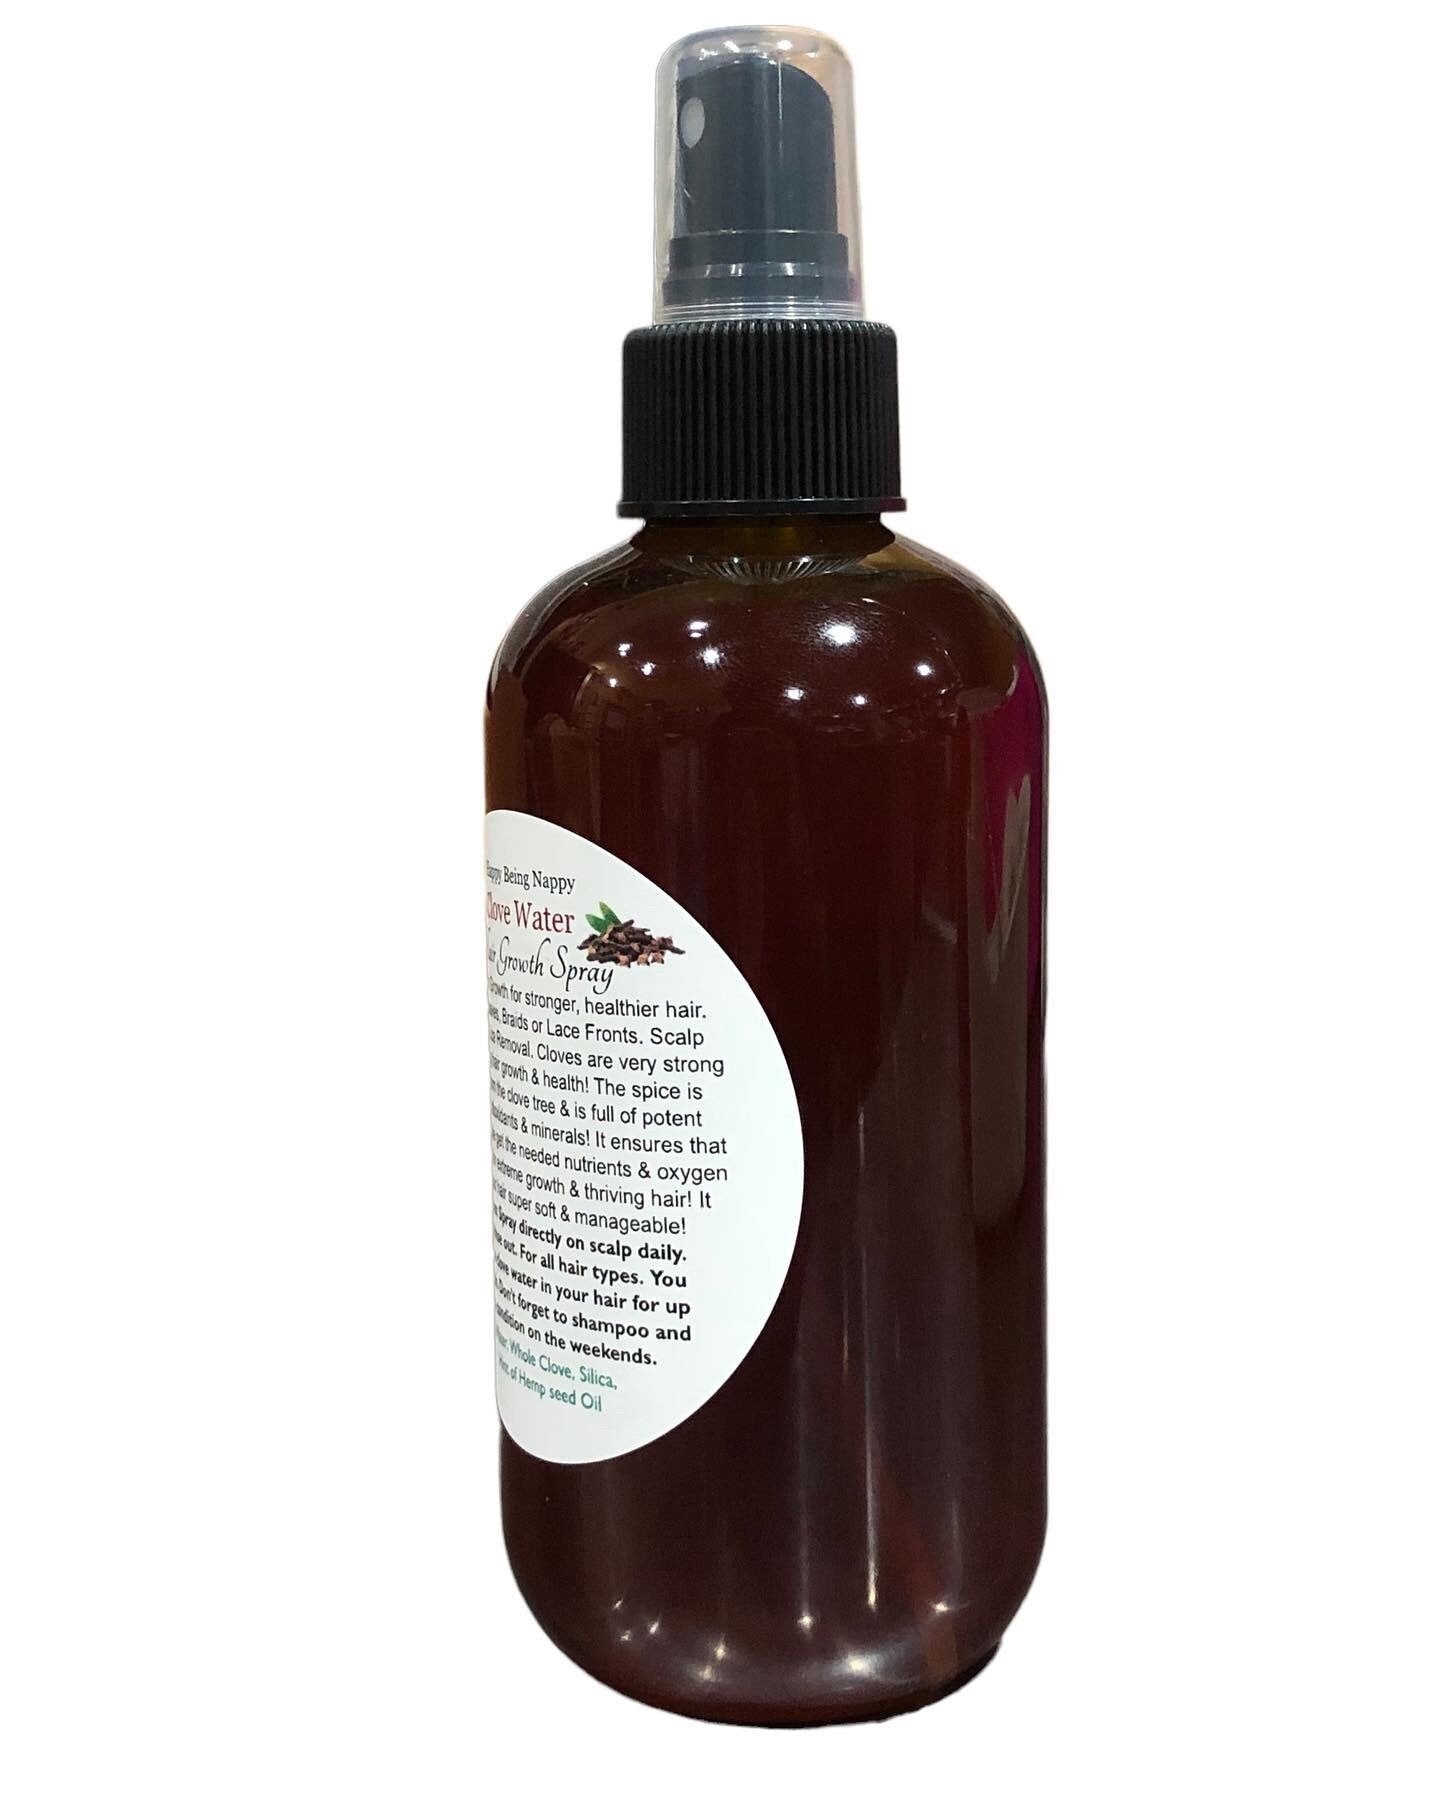 Clove Water Hair Growth Spray - Extreme Hair Growth - Provides Minerals & Oxygen -Hair Loss - All Natural, Non-Toxic - CLOVE CHALLENGE